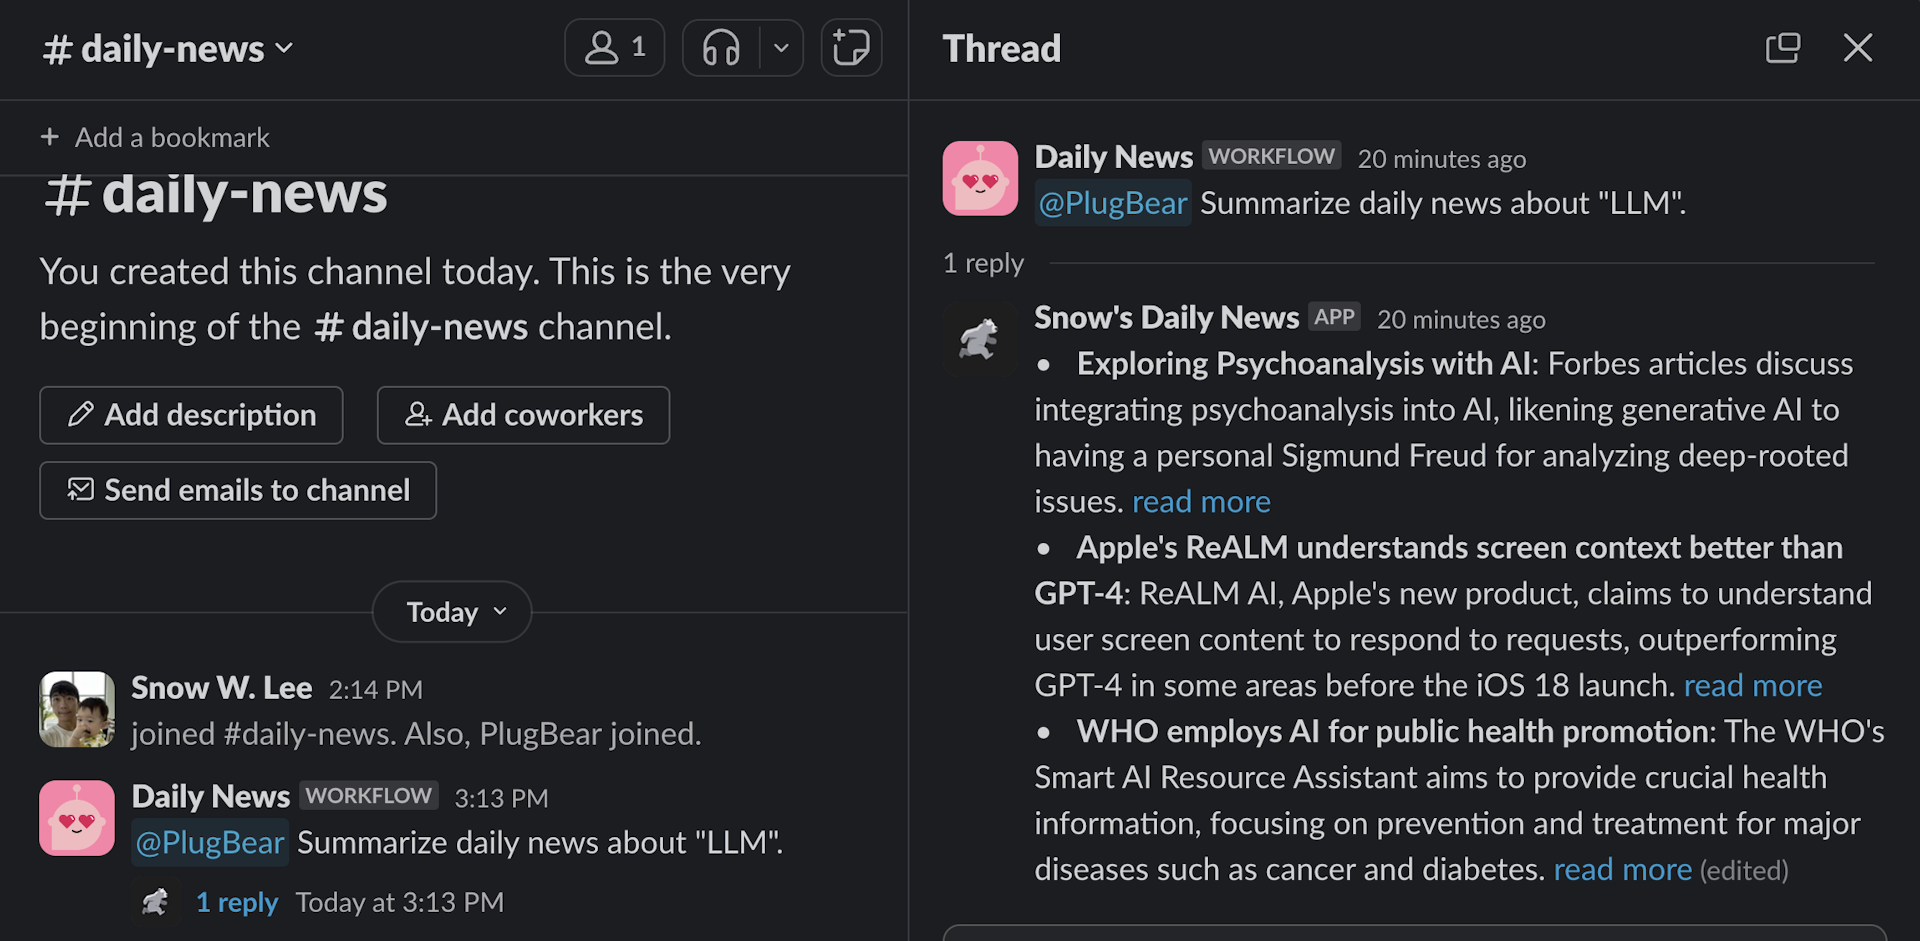 A Bot That Summarizes Daily News on Selected Topics